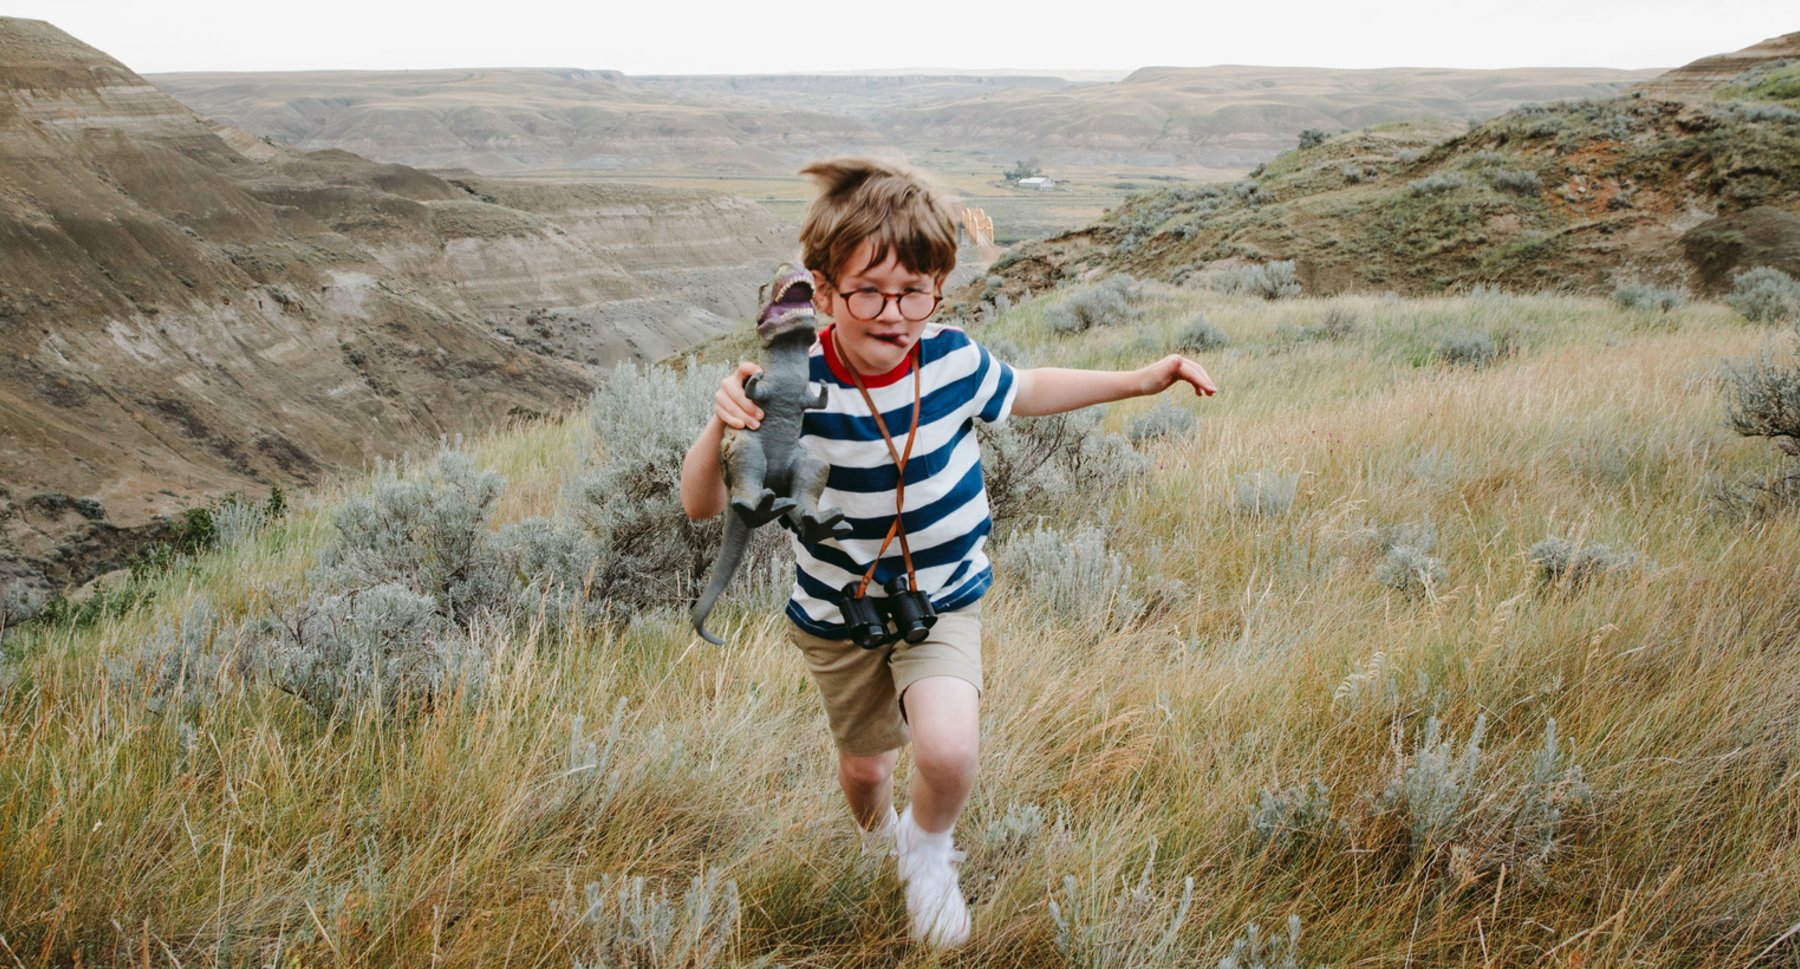 A child running through a meadow in the Canadian Badlands with a dinosaur toy.